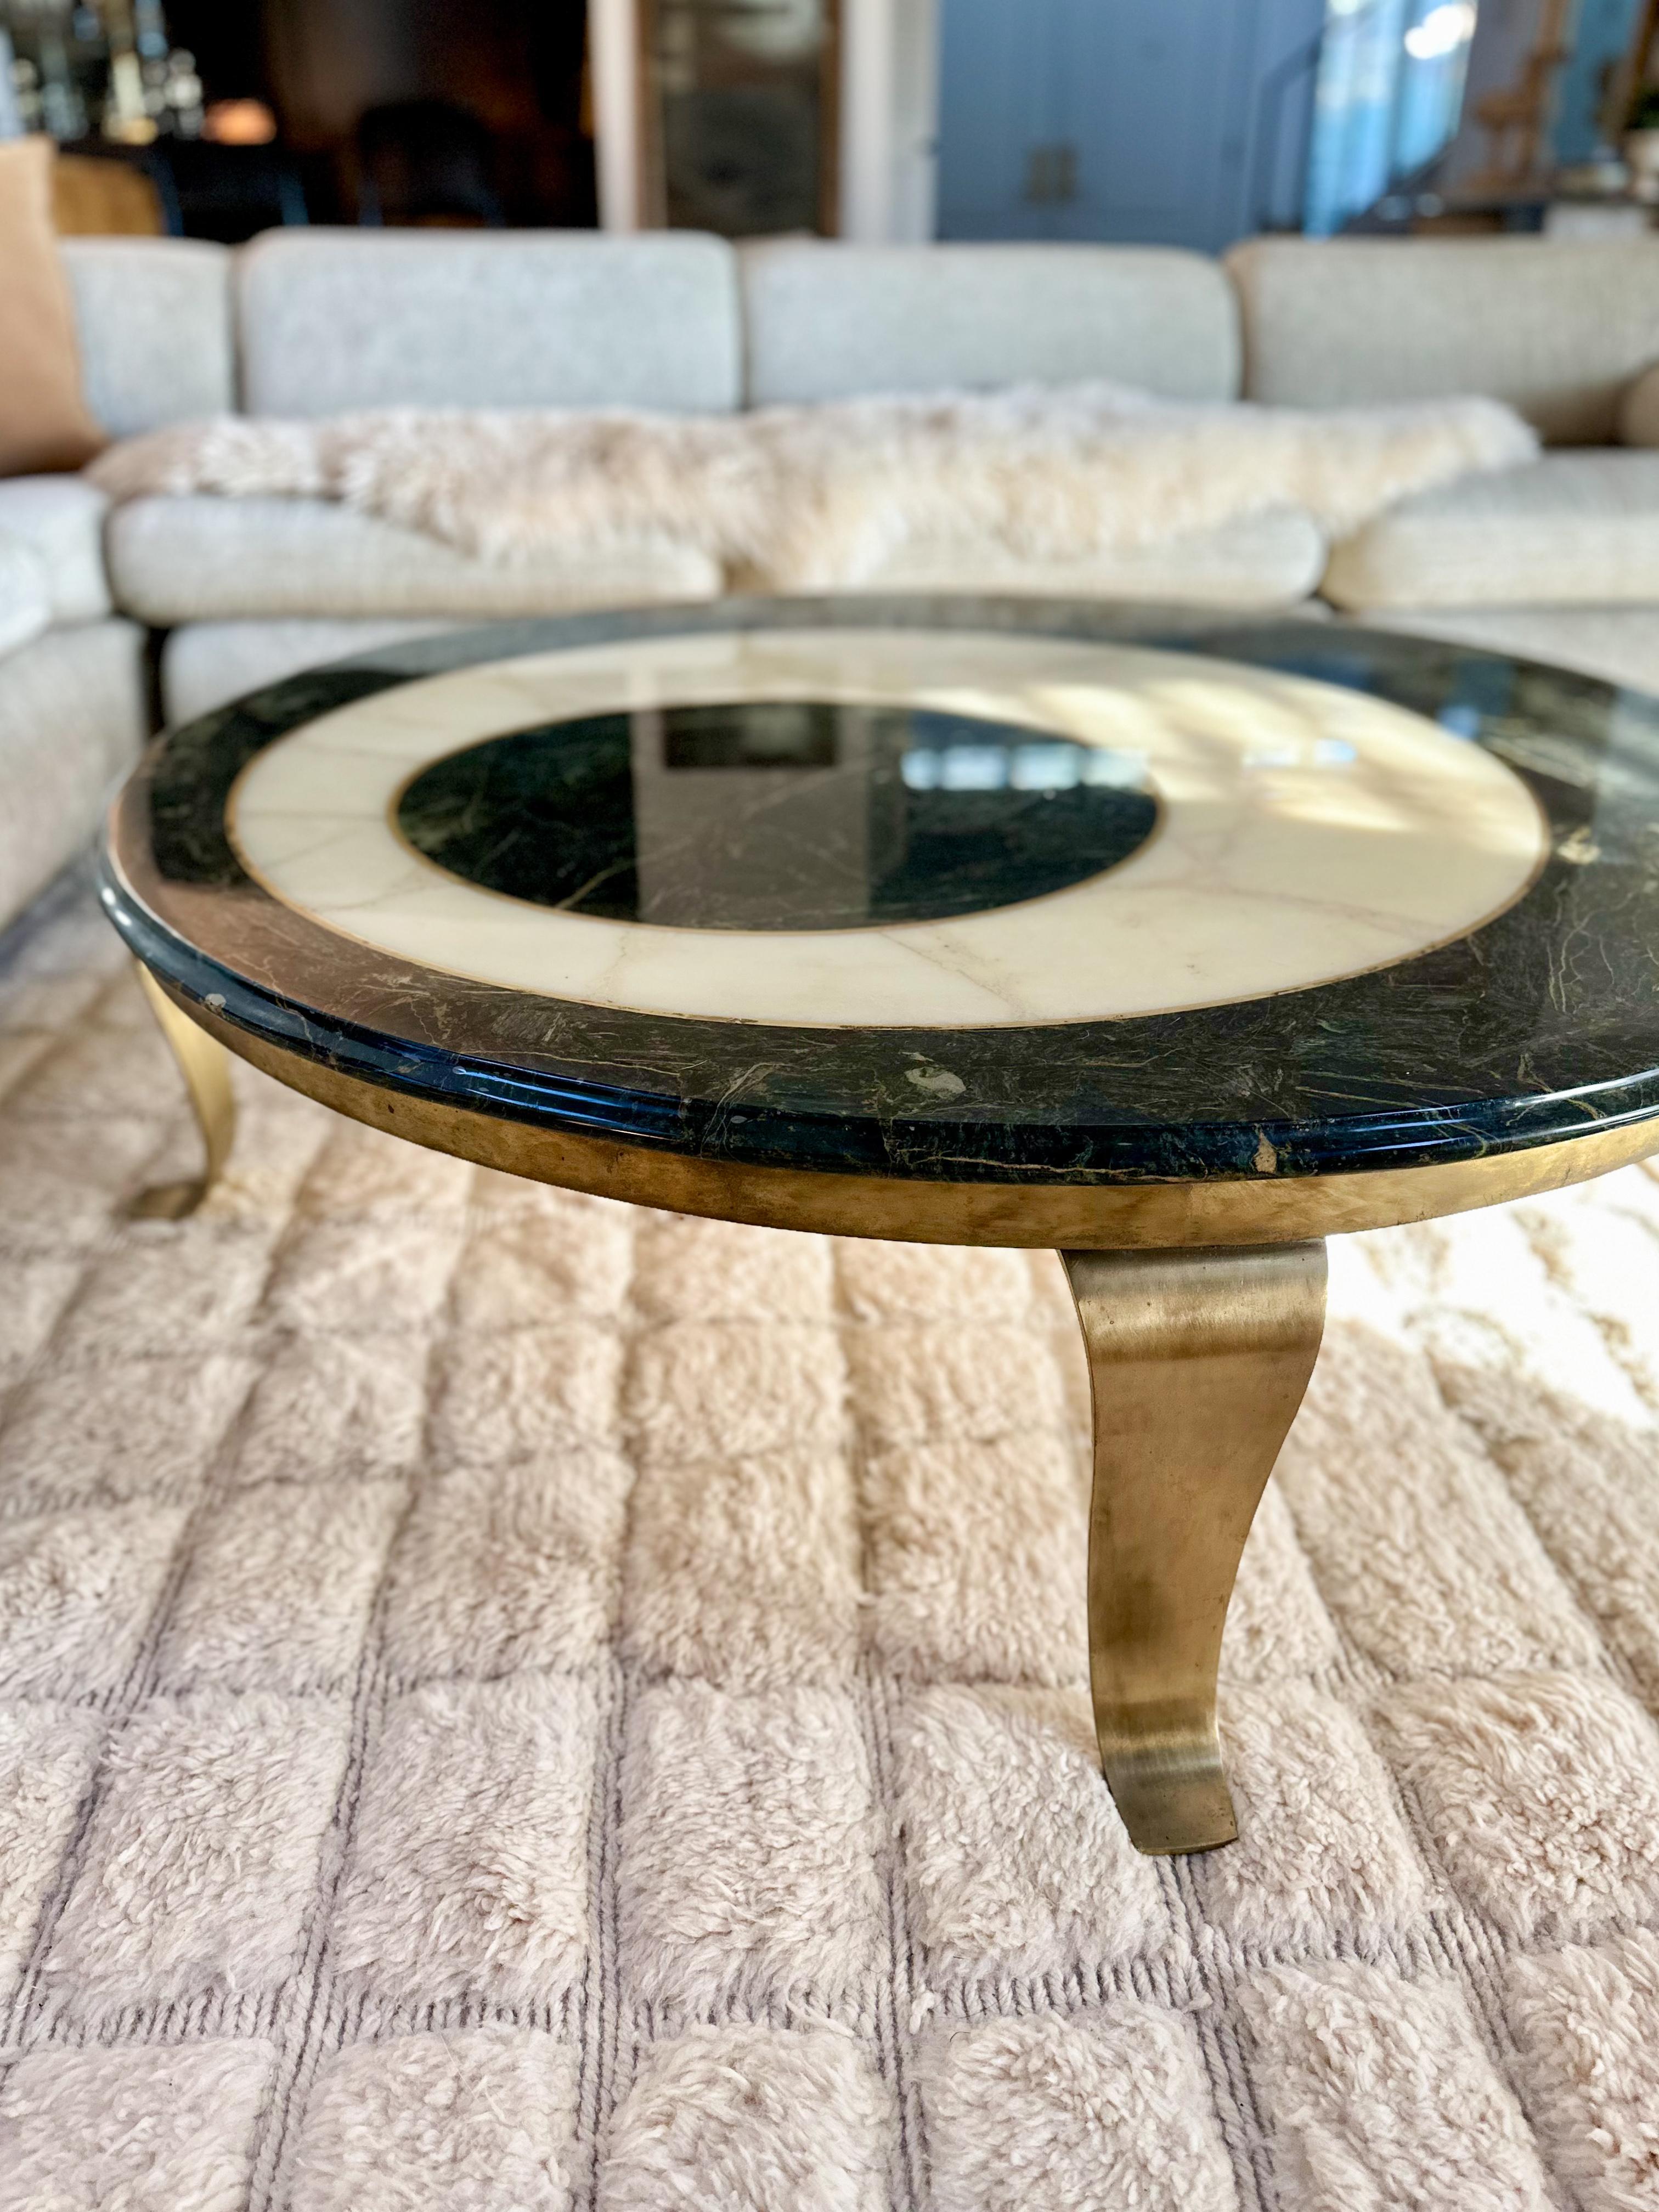 1960s Green and Cream Onyx Coffee Table by Arturo Pani for Muller of Mexico For Sale 1